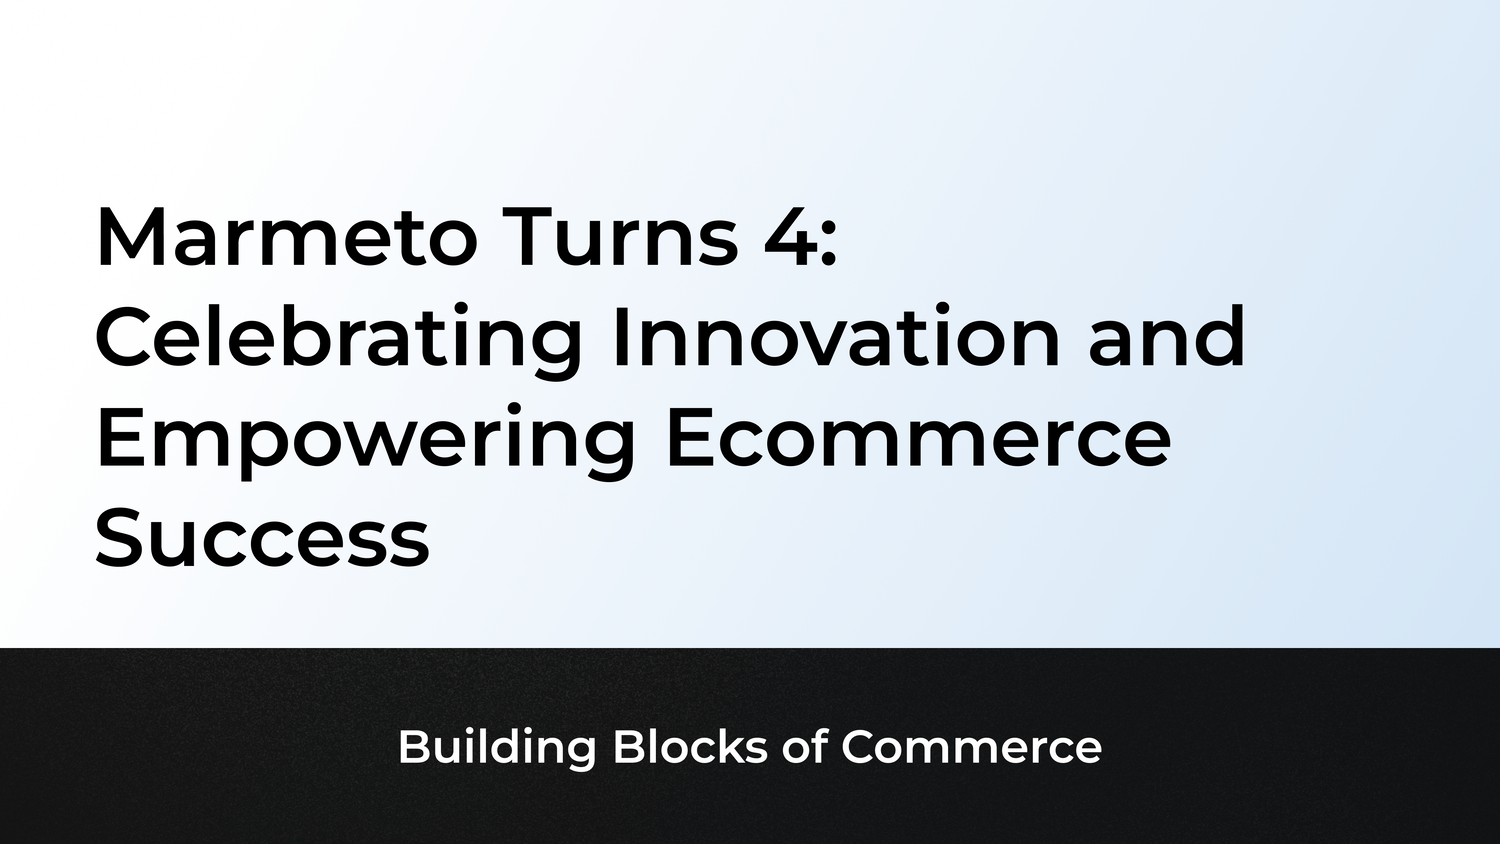 Marmeto Turns 4: Celebrating Innovation and Empowering Ecommerce Success